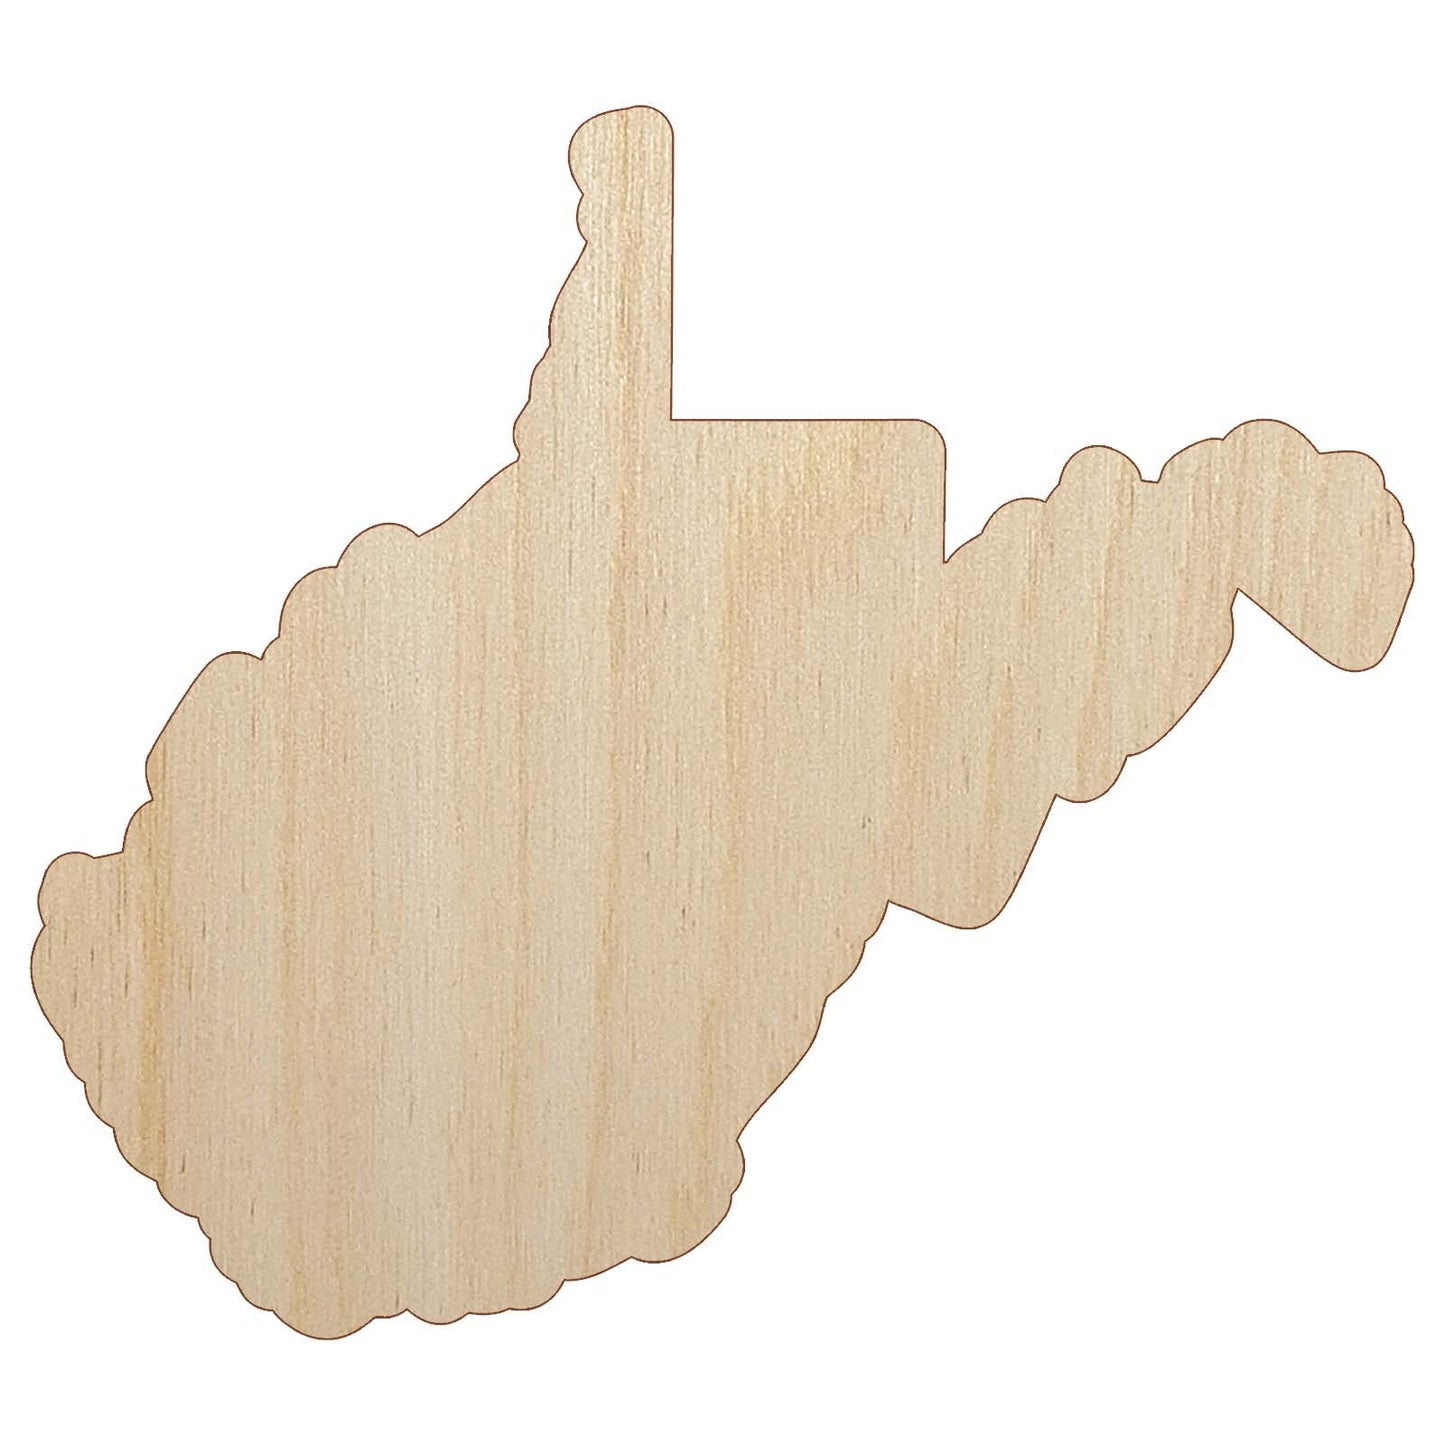 West Virginia State Silhouette Unfinished Wood Shape Piece Cutout for DIY Craft Projects - 1/4 Inch Thick - 6.25 Inch Size